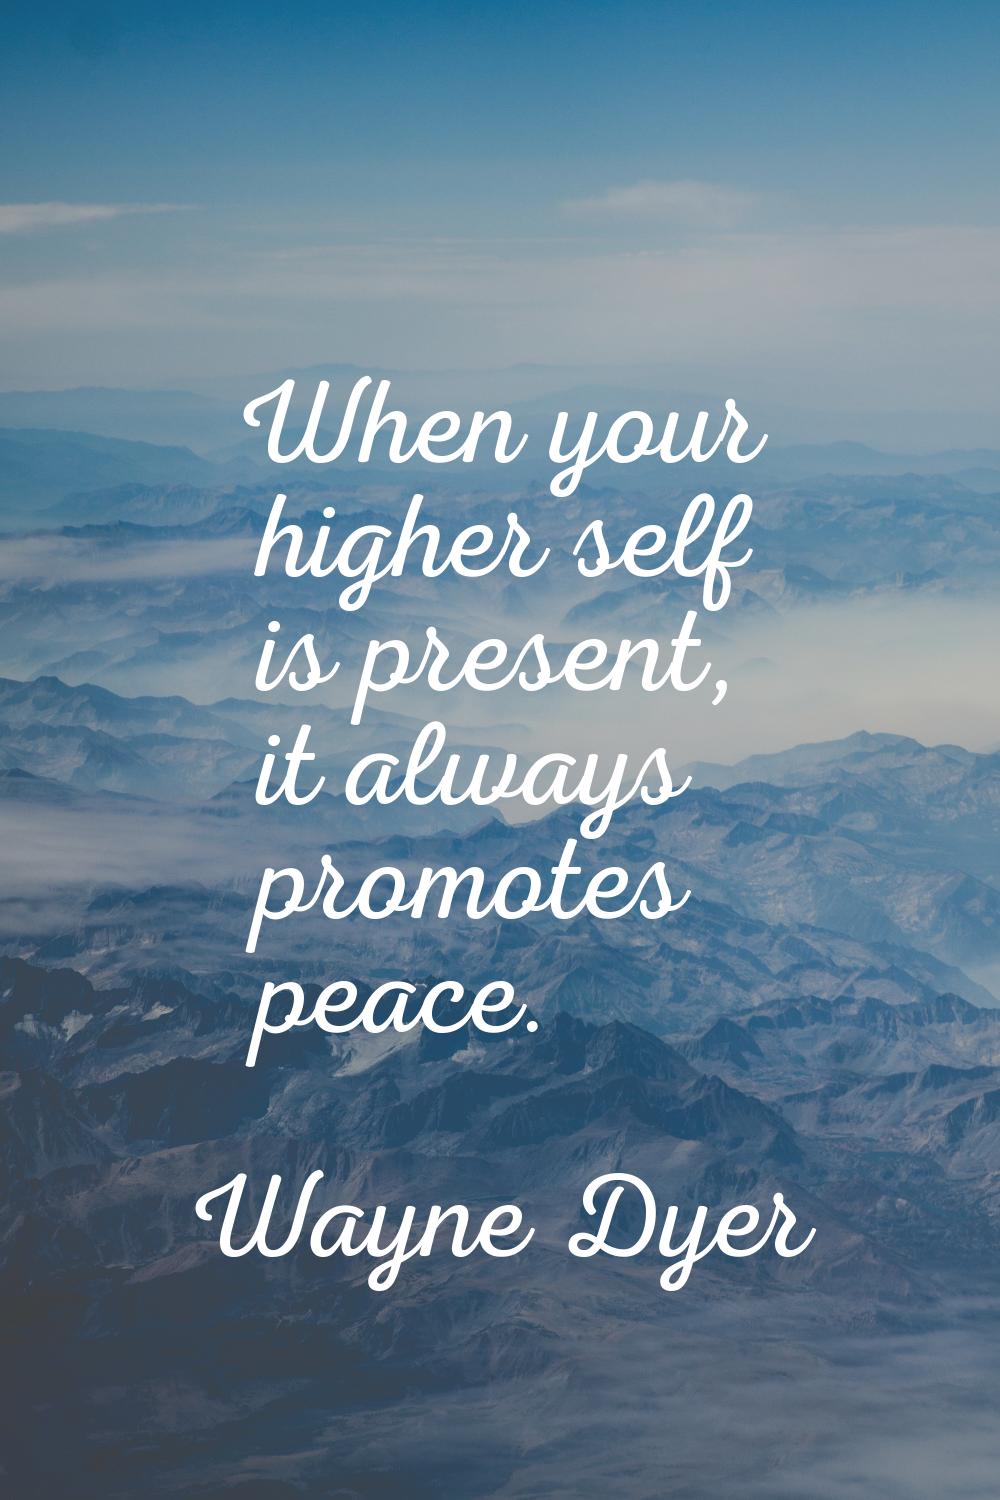 When your higher self is present, it always promotes peace.